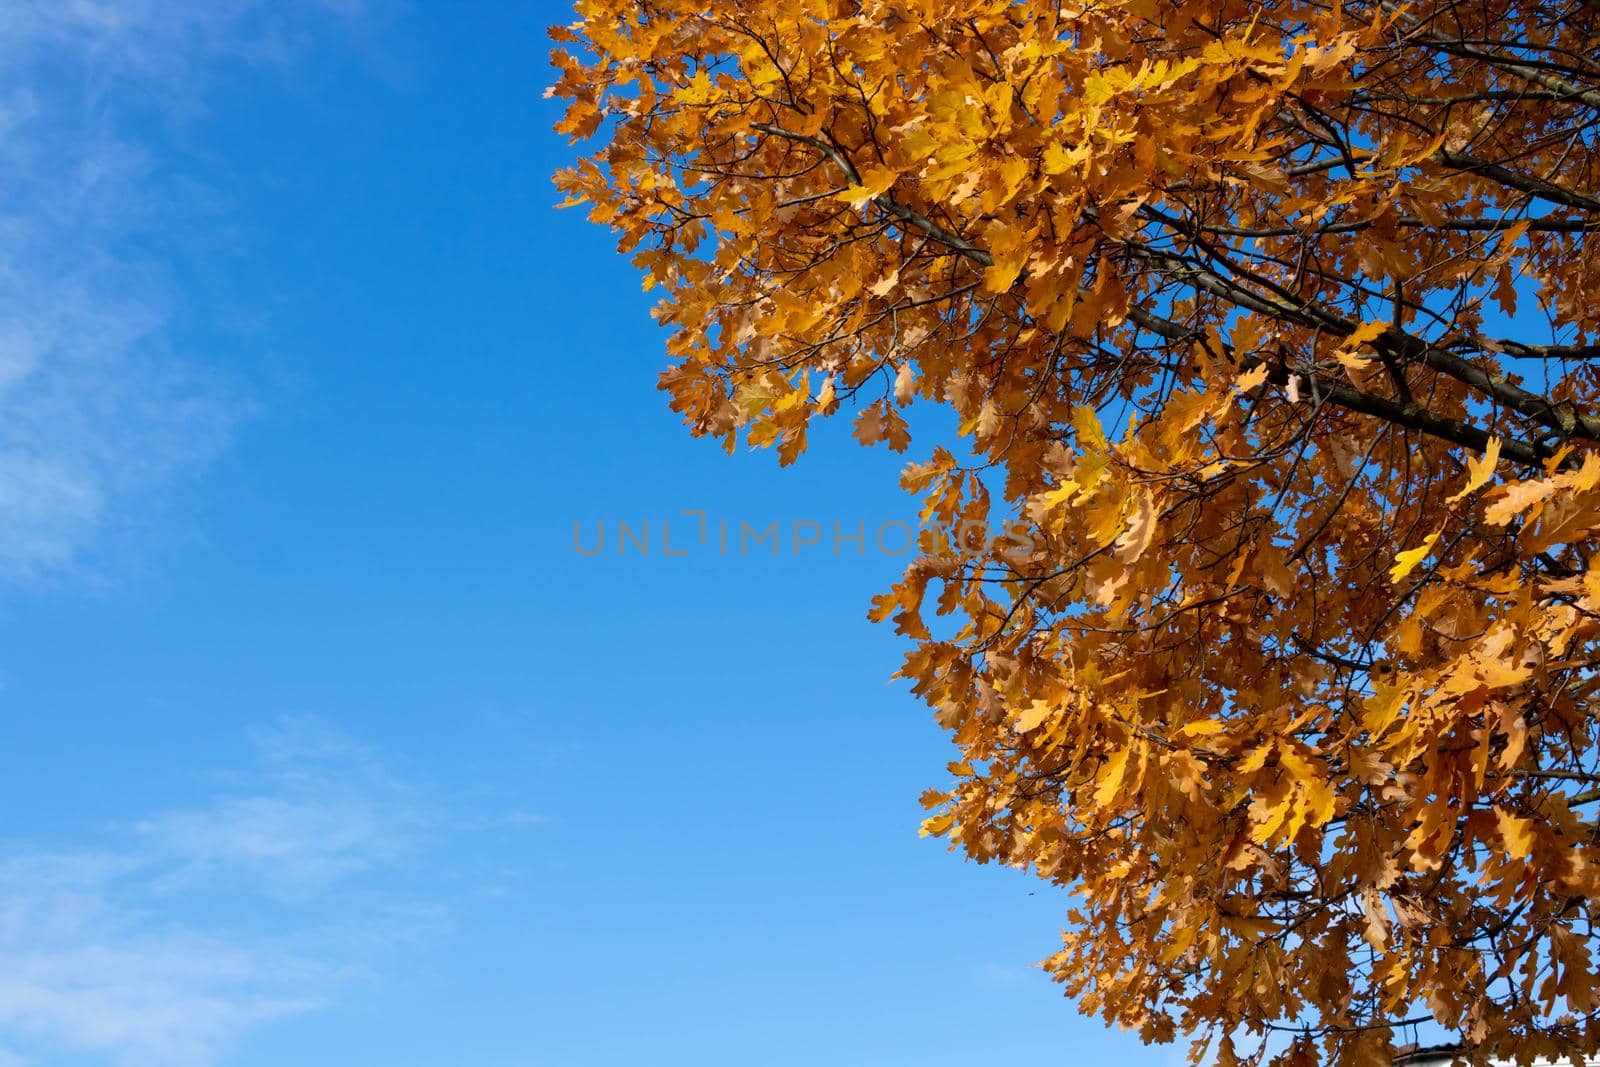 Autumn leaves with the blue sky background by lapushka62